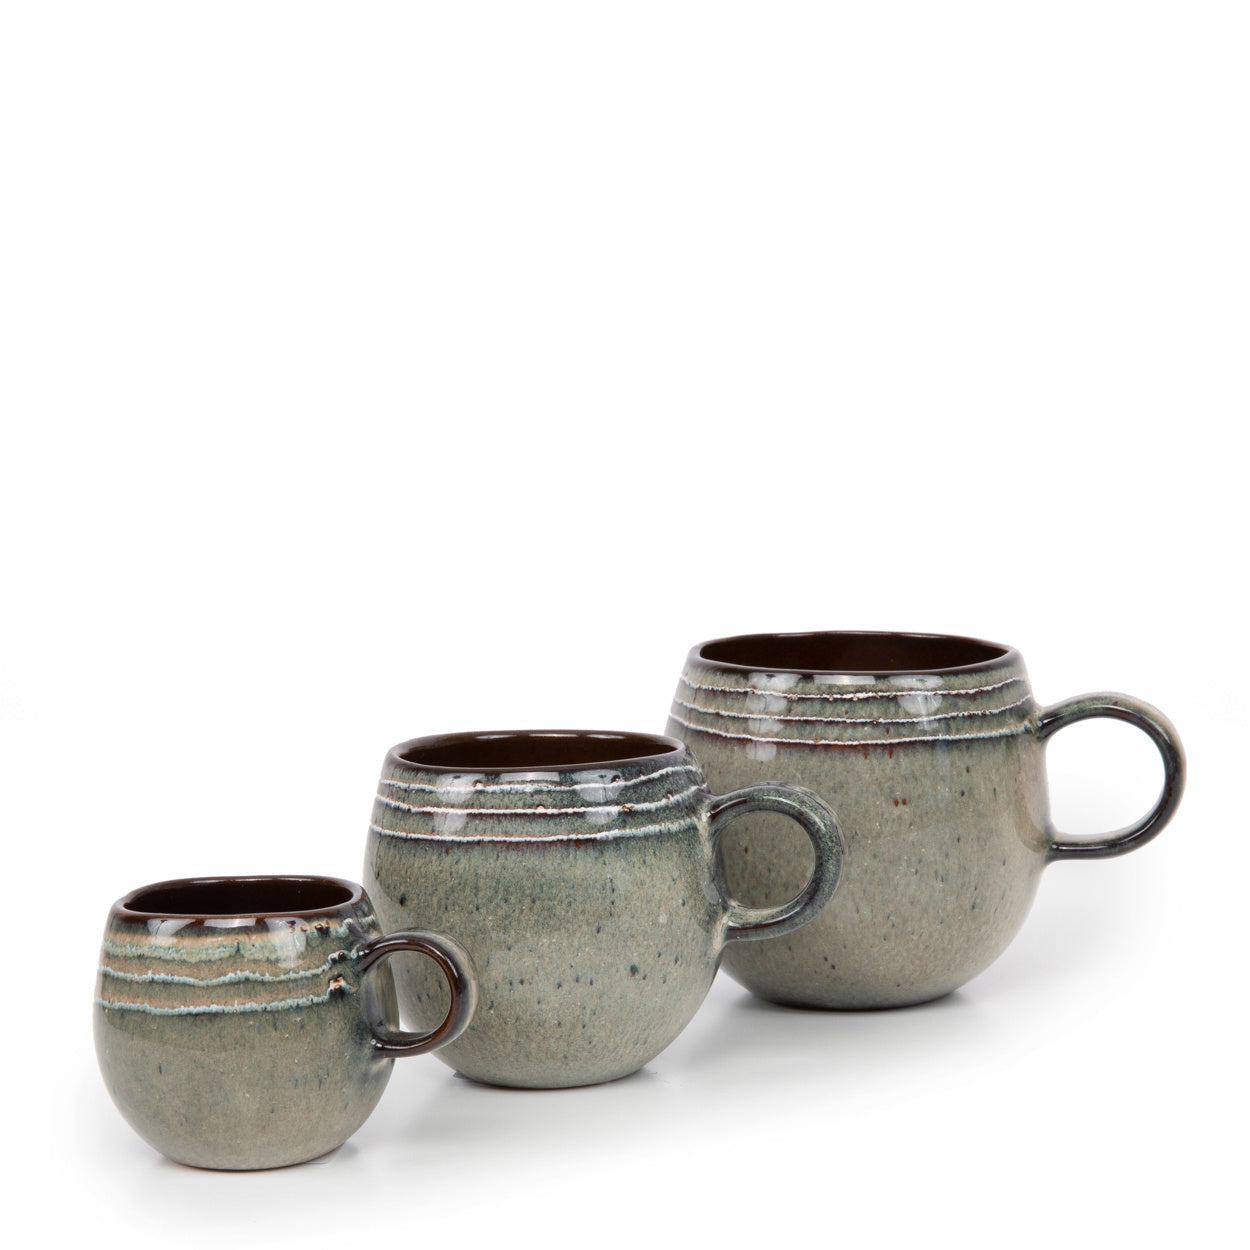 THE COMPORTA Espresso cup - S - Set of 6 side view of set